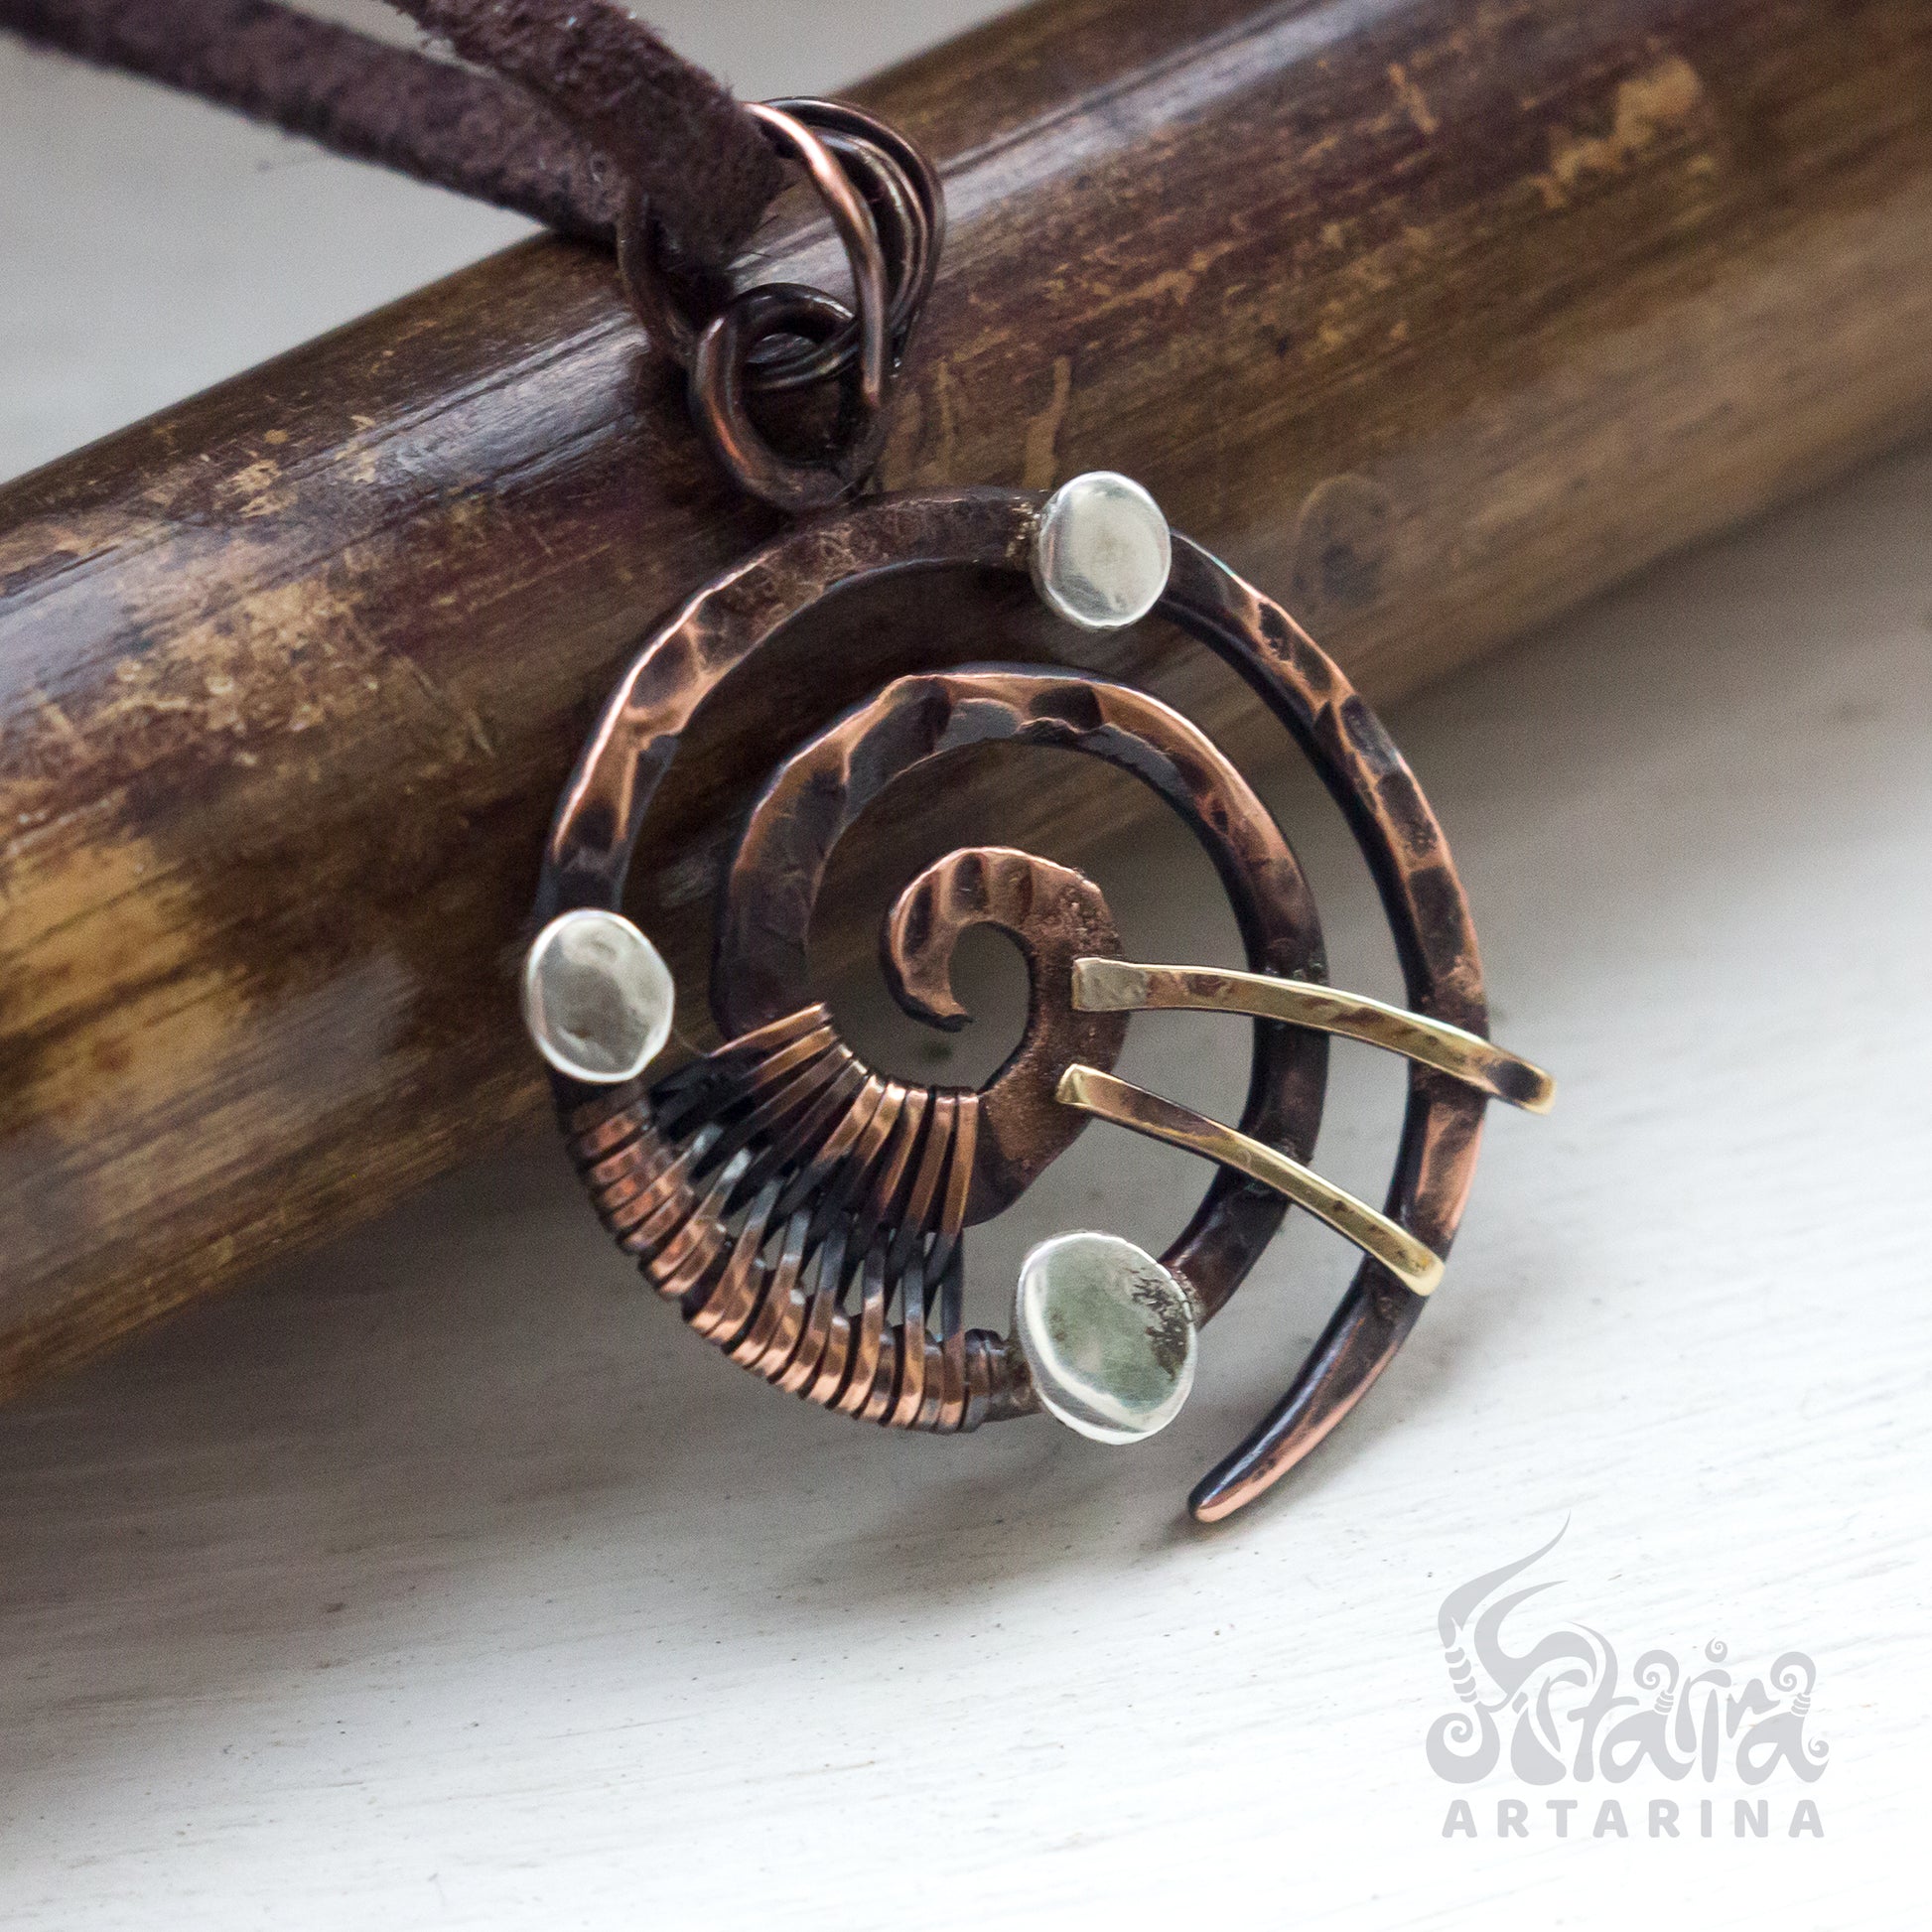 Industrial style wirework mix metals spiral pendant pic 1